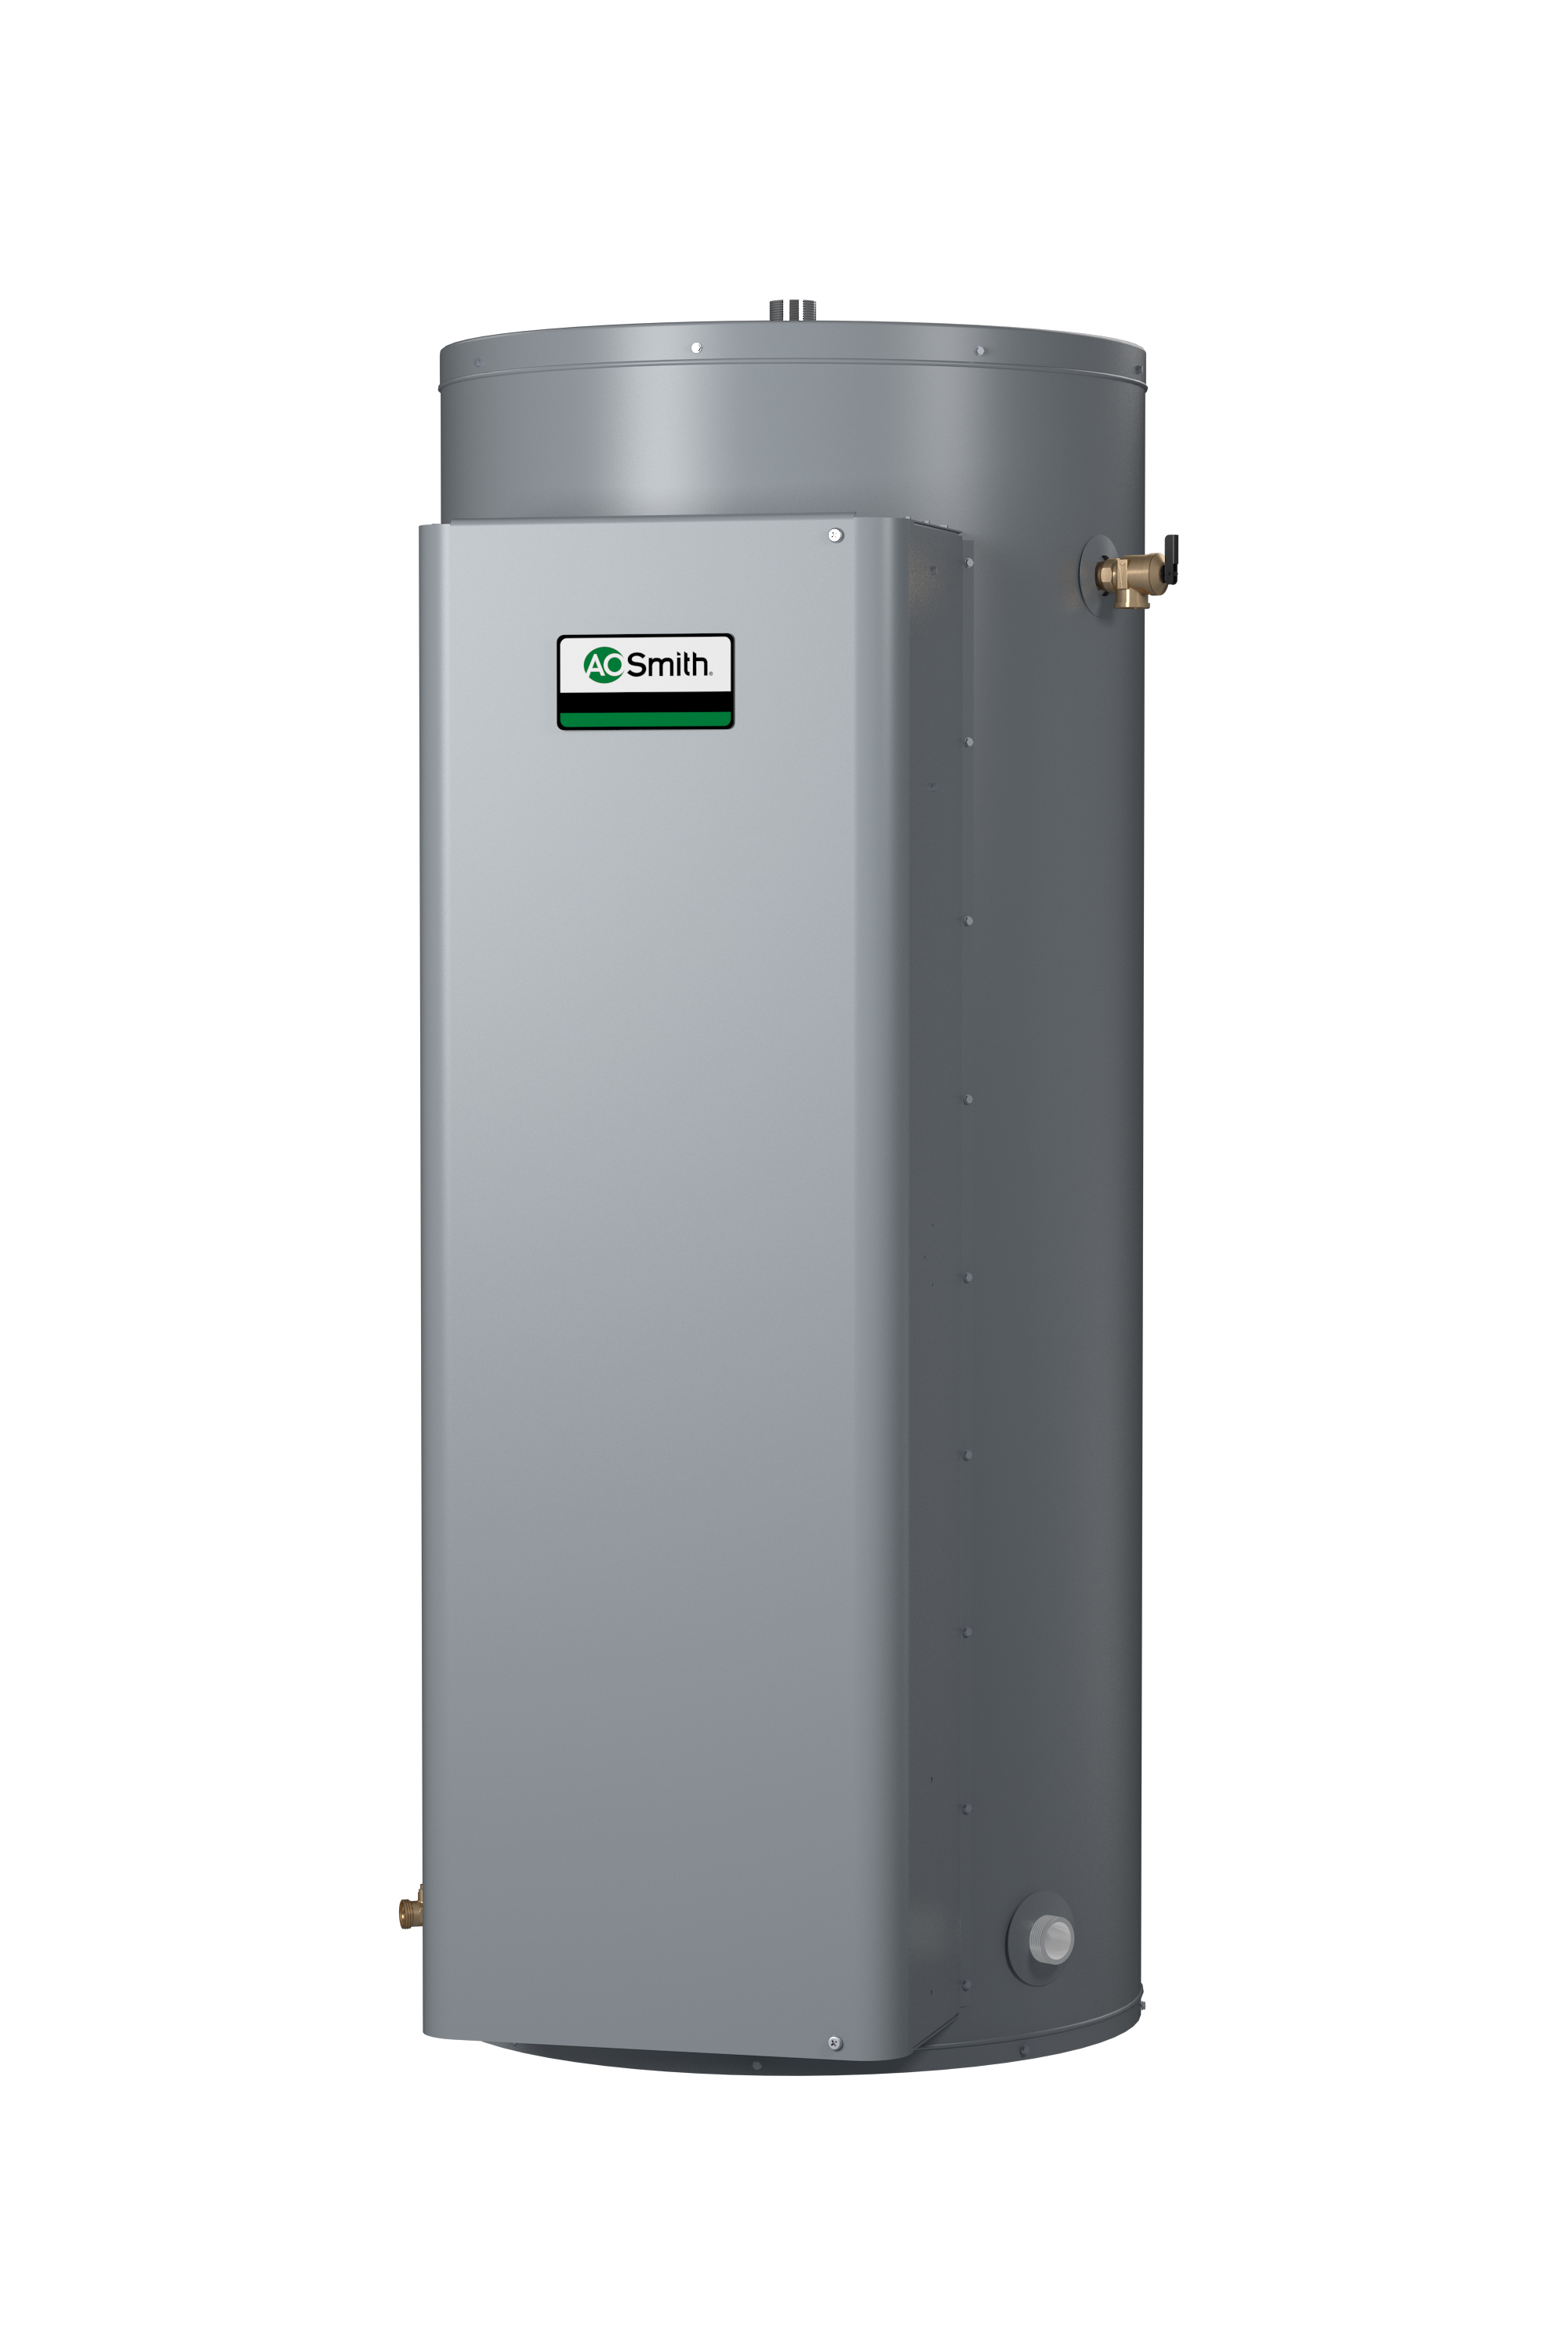 AO SMITH DVE-52-12, 50 GALLONS, 12.3KW, 208 VOLT, 33.3 AMPS, 3 PHASE, 3 ELEMENT, GOLD Xi SERIES HEAVY DUTY COMMERCIAL ELECTRIC WATER HEATER